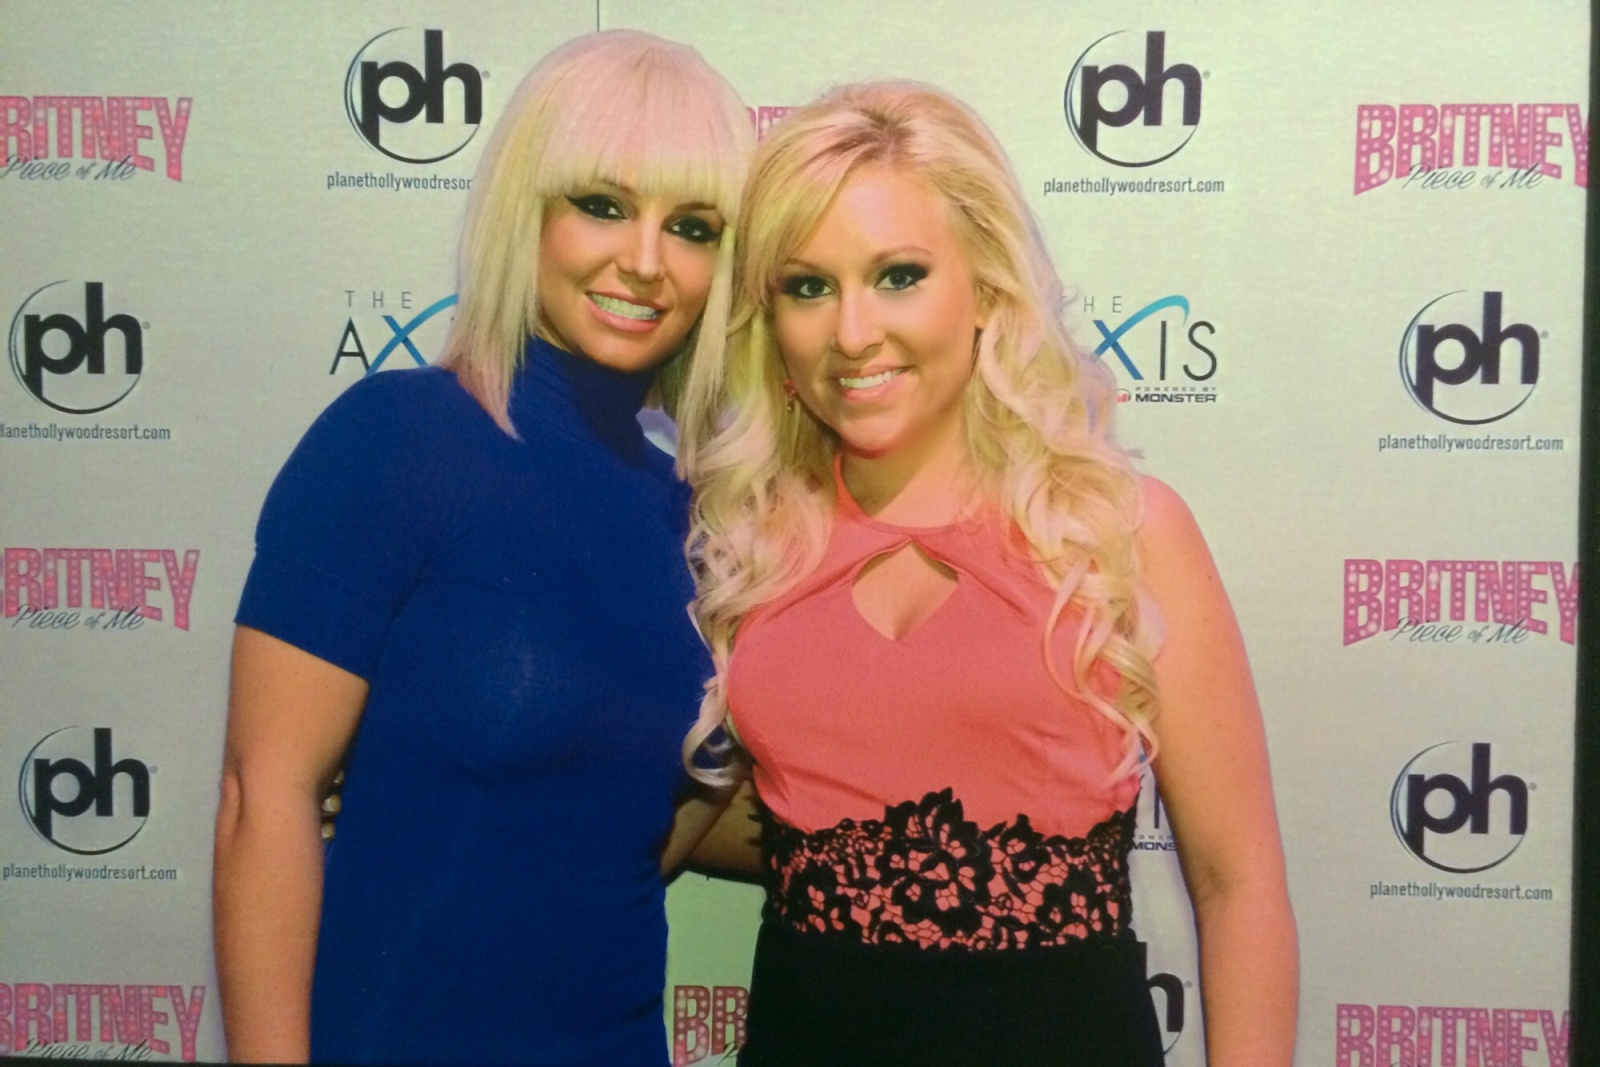 Meet and greet Britney Spears. Get back britney